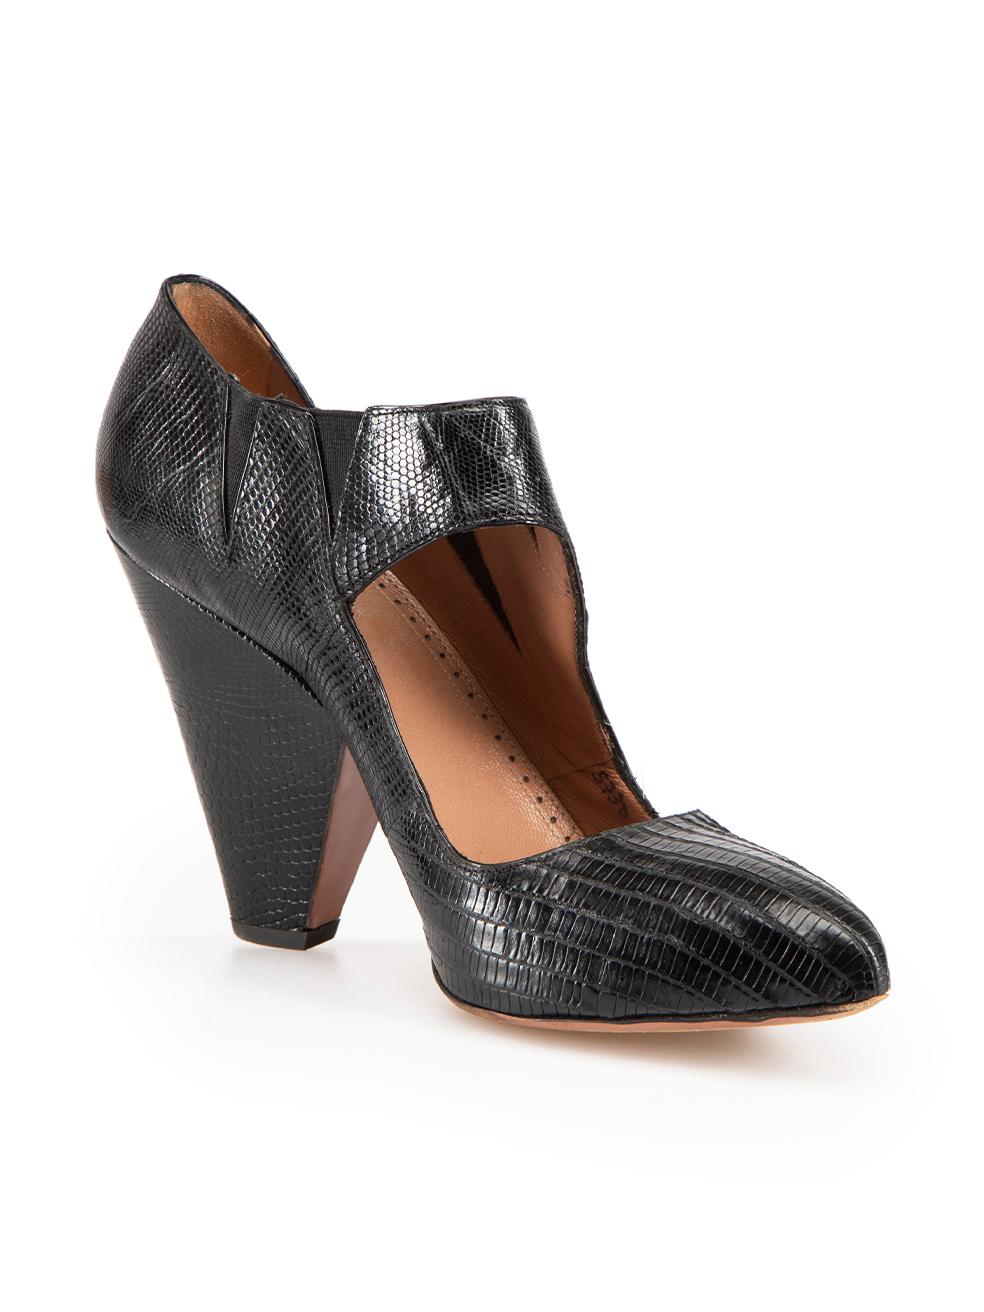 CONDITION is Very good. Minimal wear to heels is evident. Minimal abrasions to back of heel and edge of right shoe on this used Ala√Øa designer resale item. This item comes with original dust bag.
 
Details
Black
Leather
Heels
Lizard embossed
Point